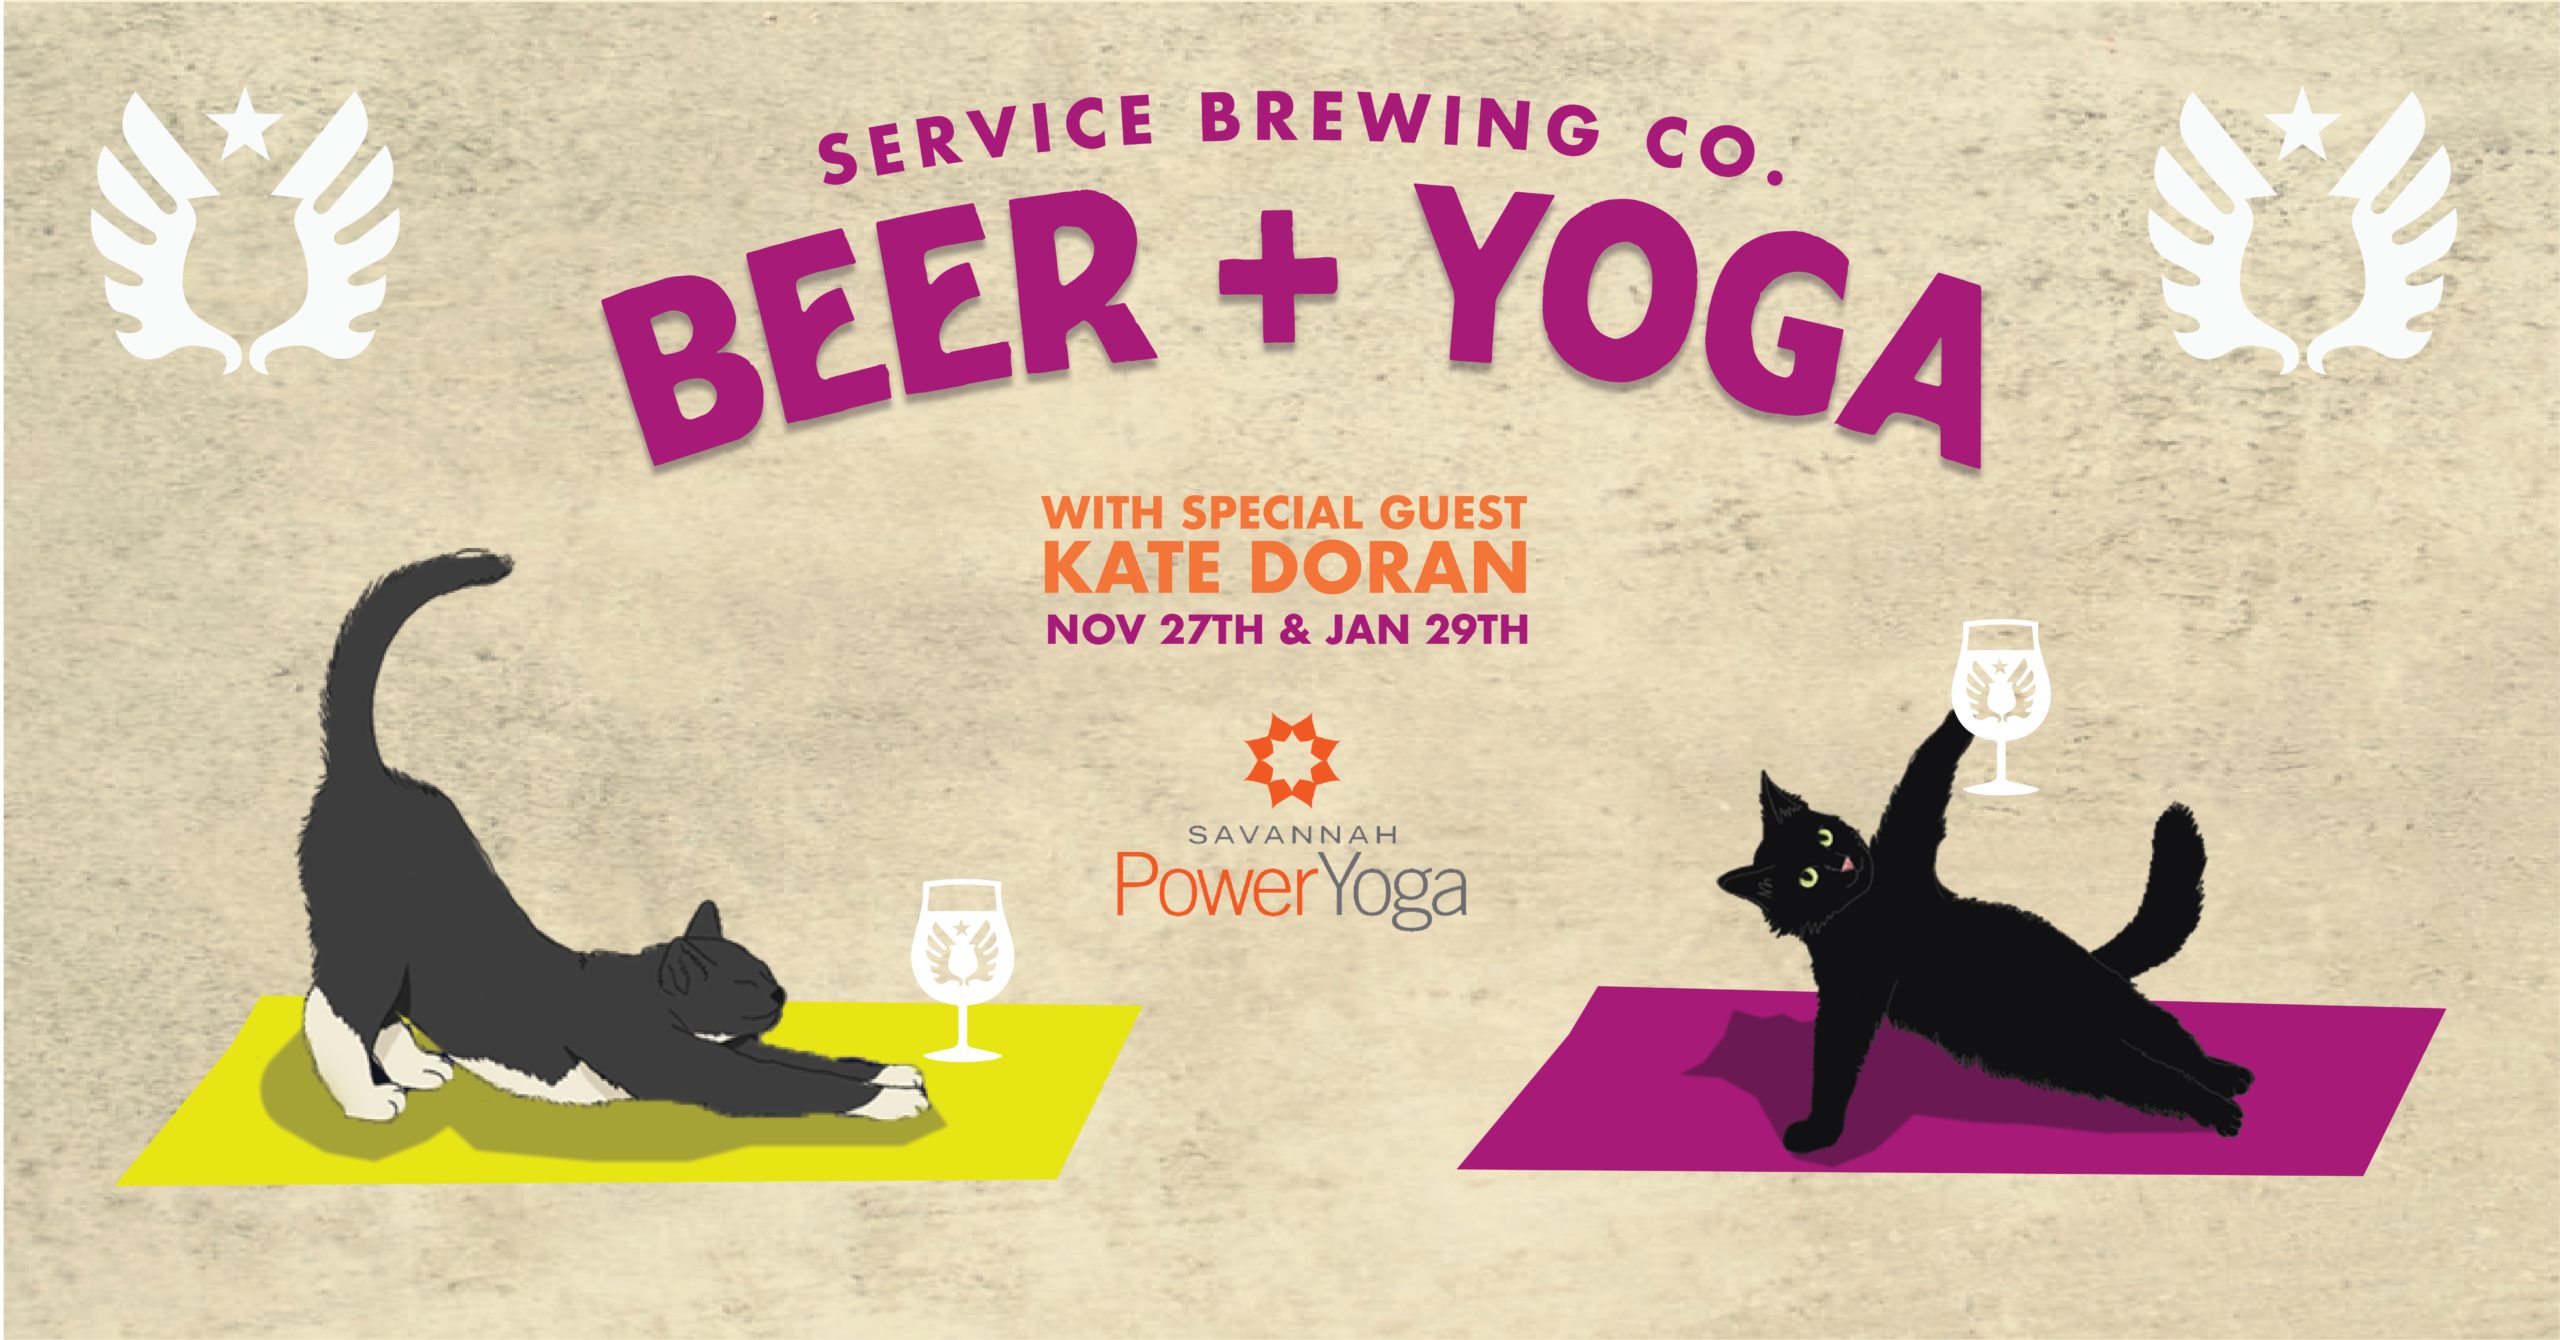 beer and yoga